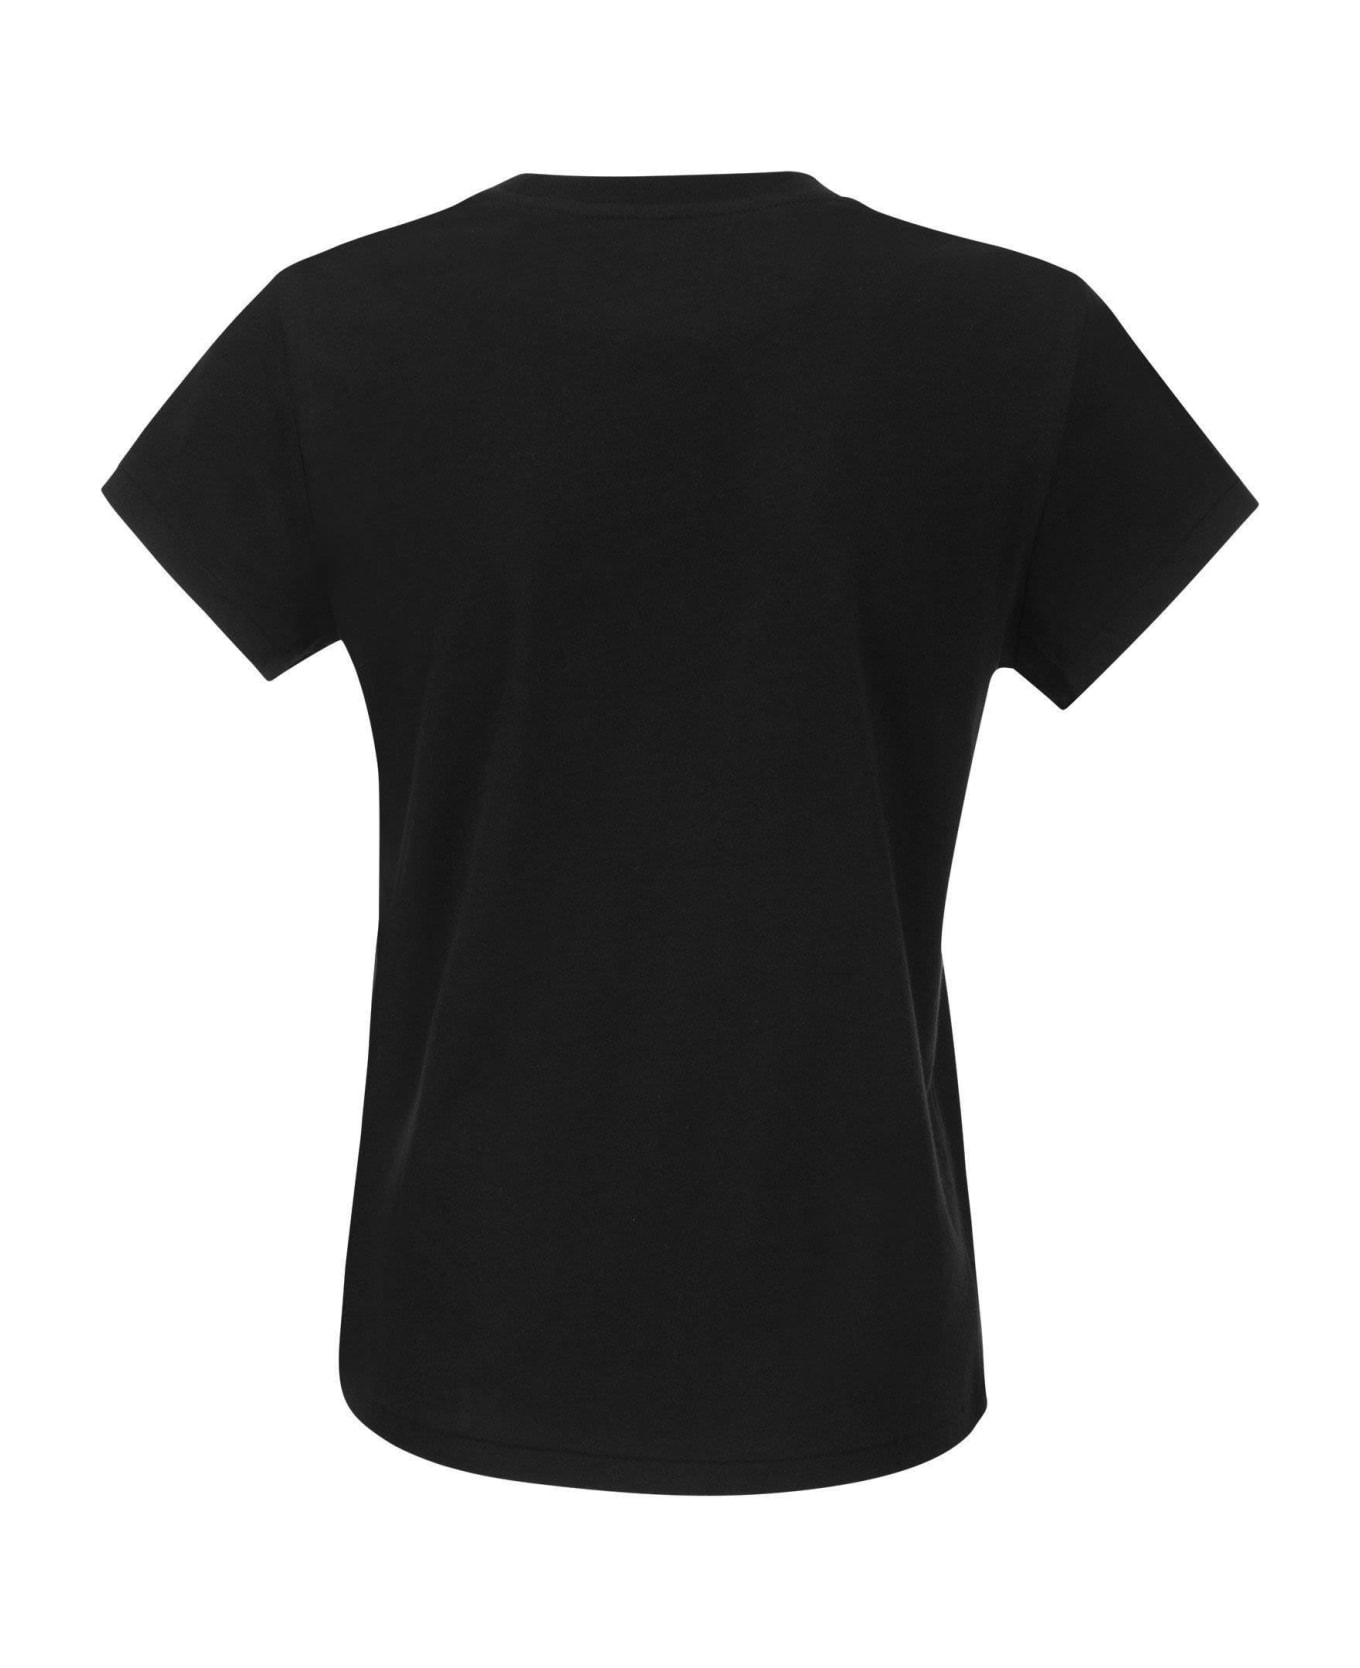 Polo Ralph Lauren Black T-shirt With Contrasting Pony - Black Tシャツ